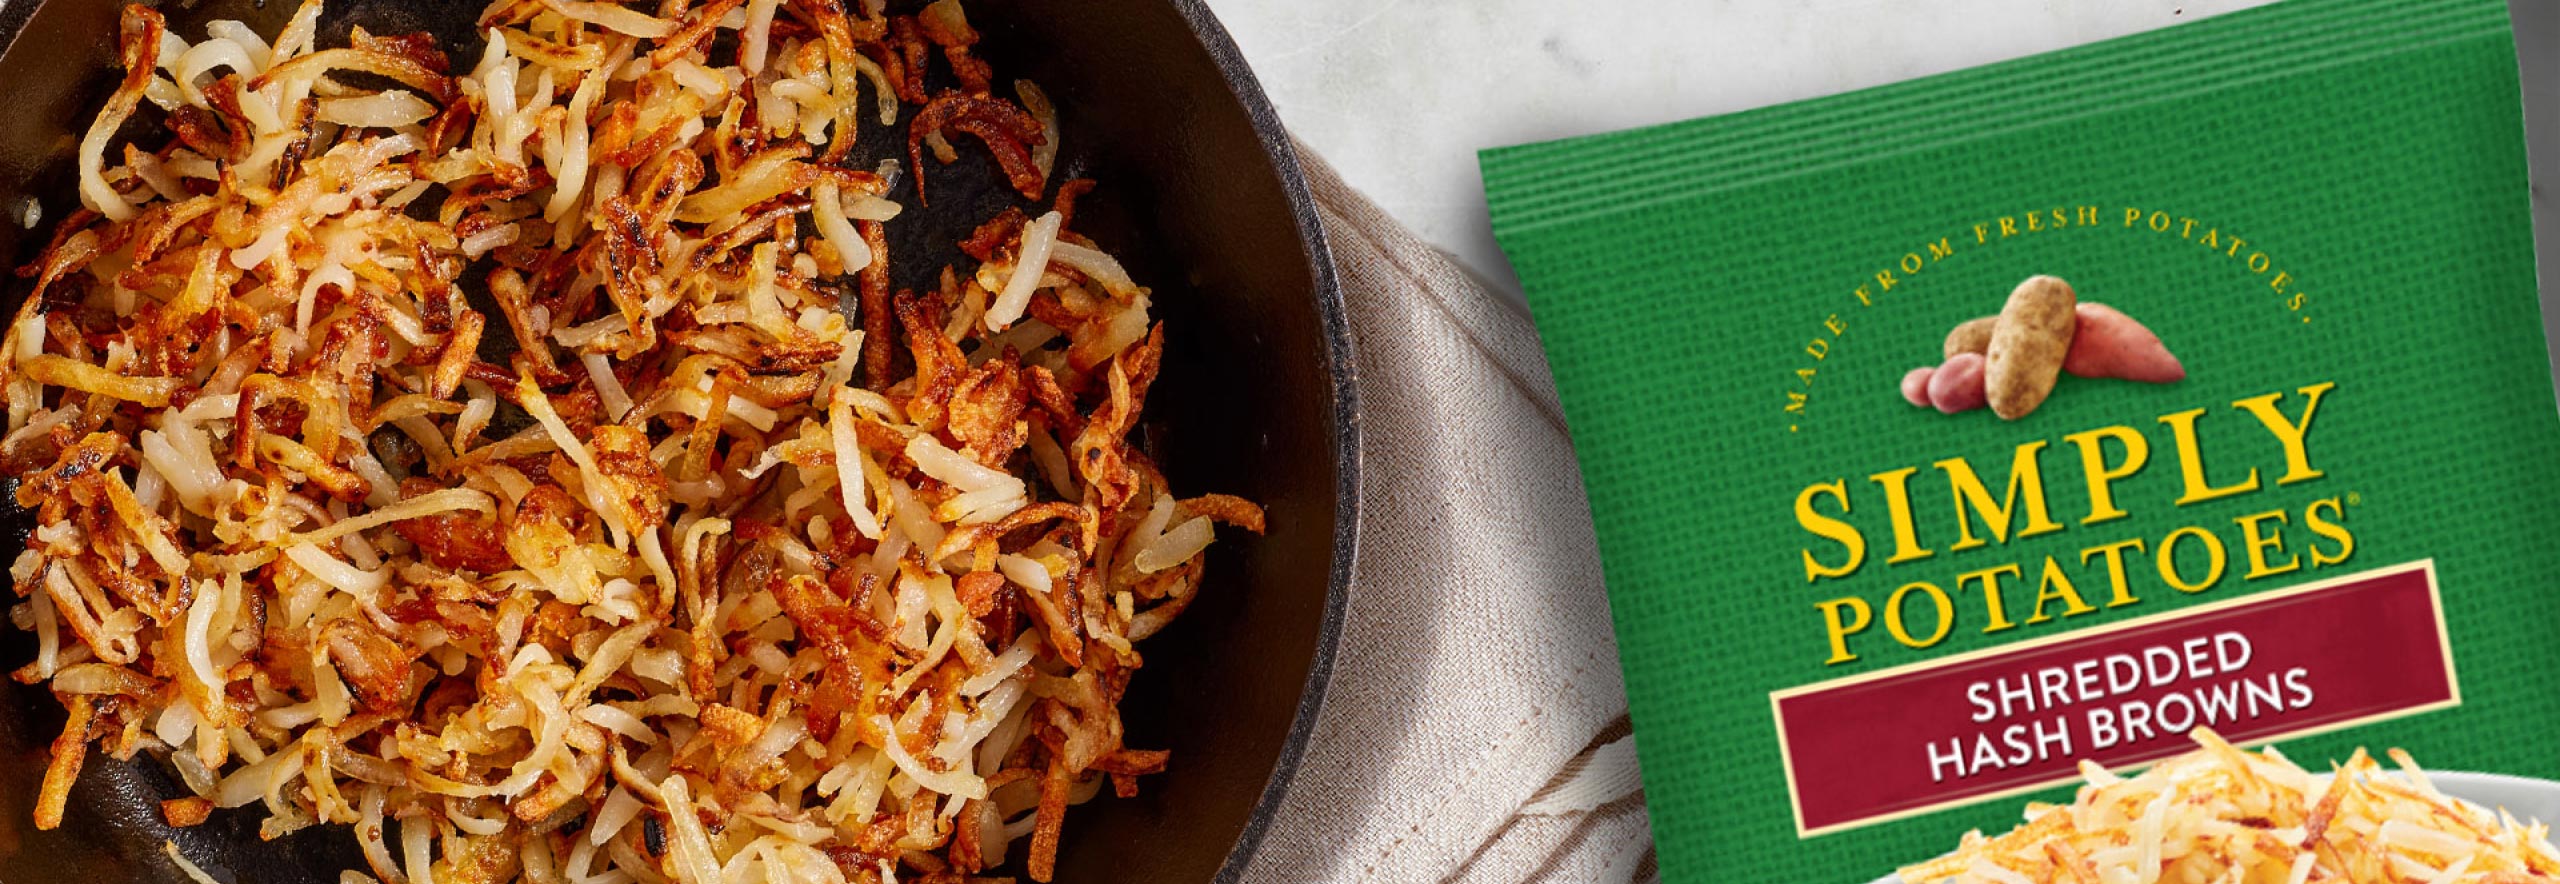 Photo of Simply Potatoes Shredded Hash Browns